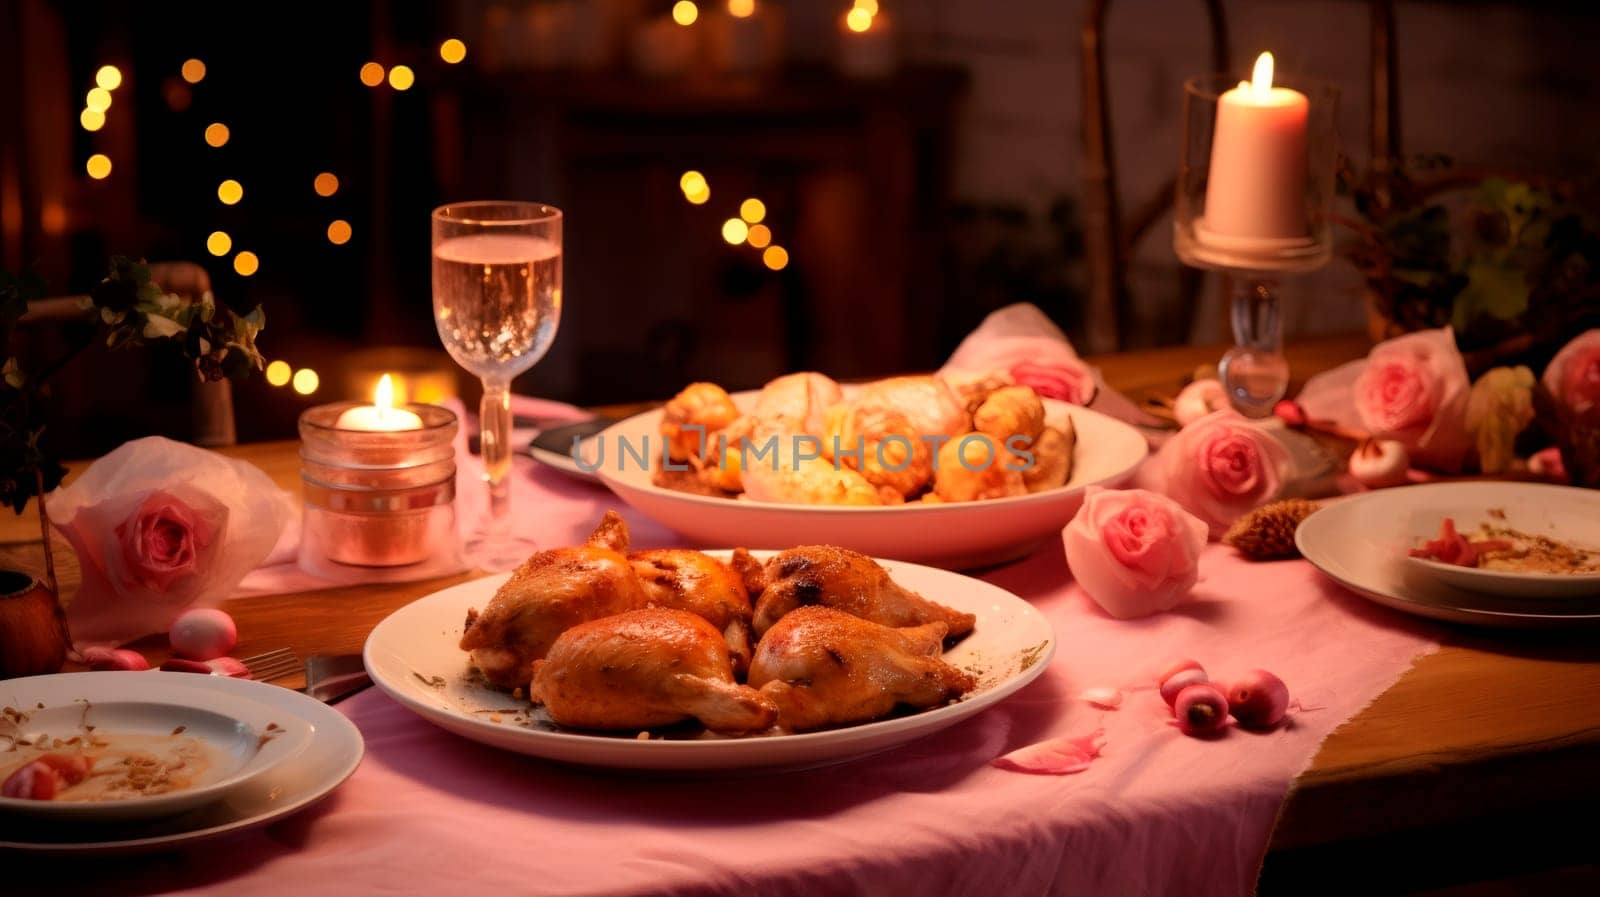 Chicken meat in plates with candles on the table. by Nataliya